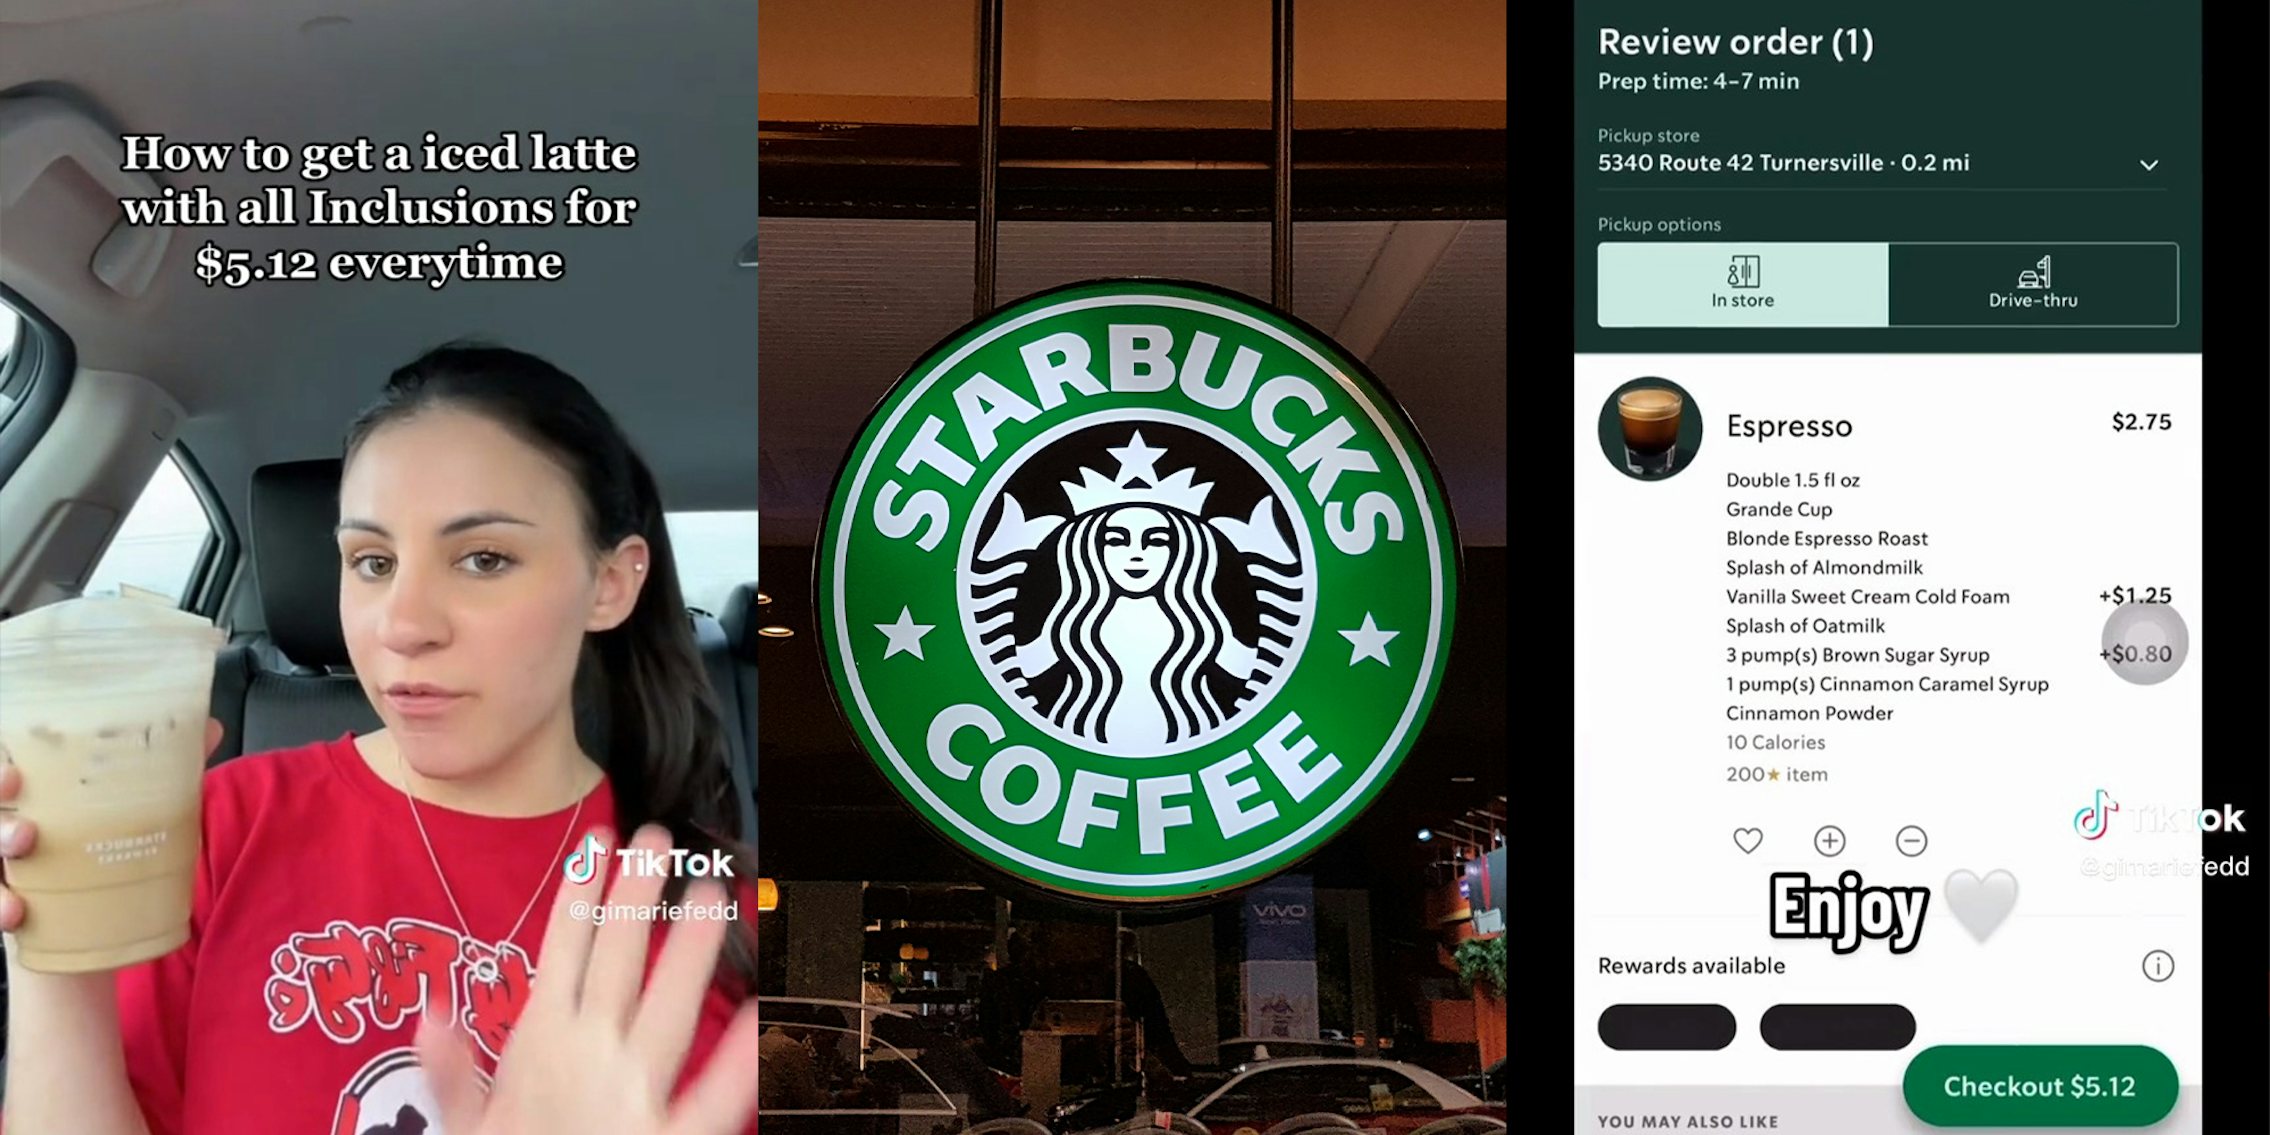 Starbucks customer shares hack to get customized iced latte for $5. But baristas are conflicted